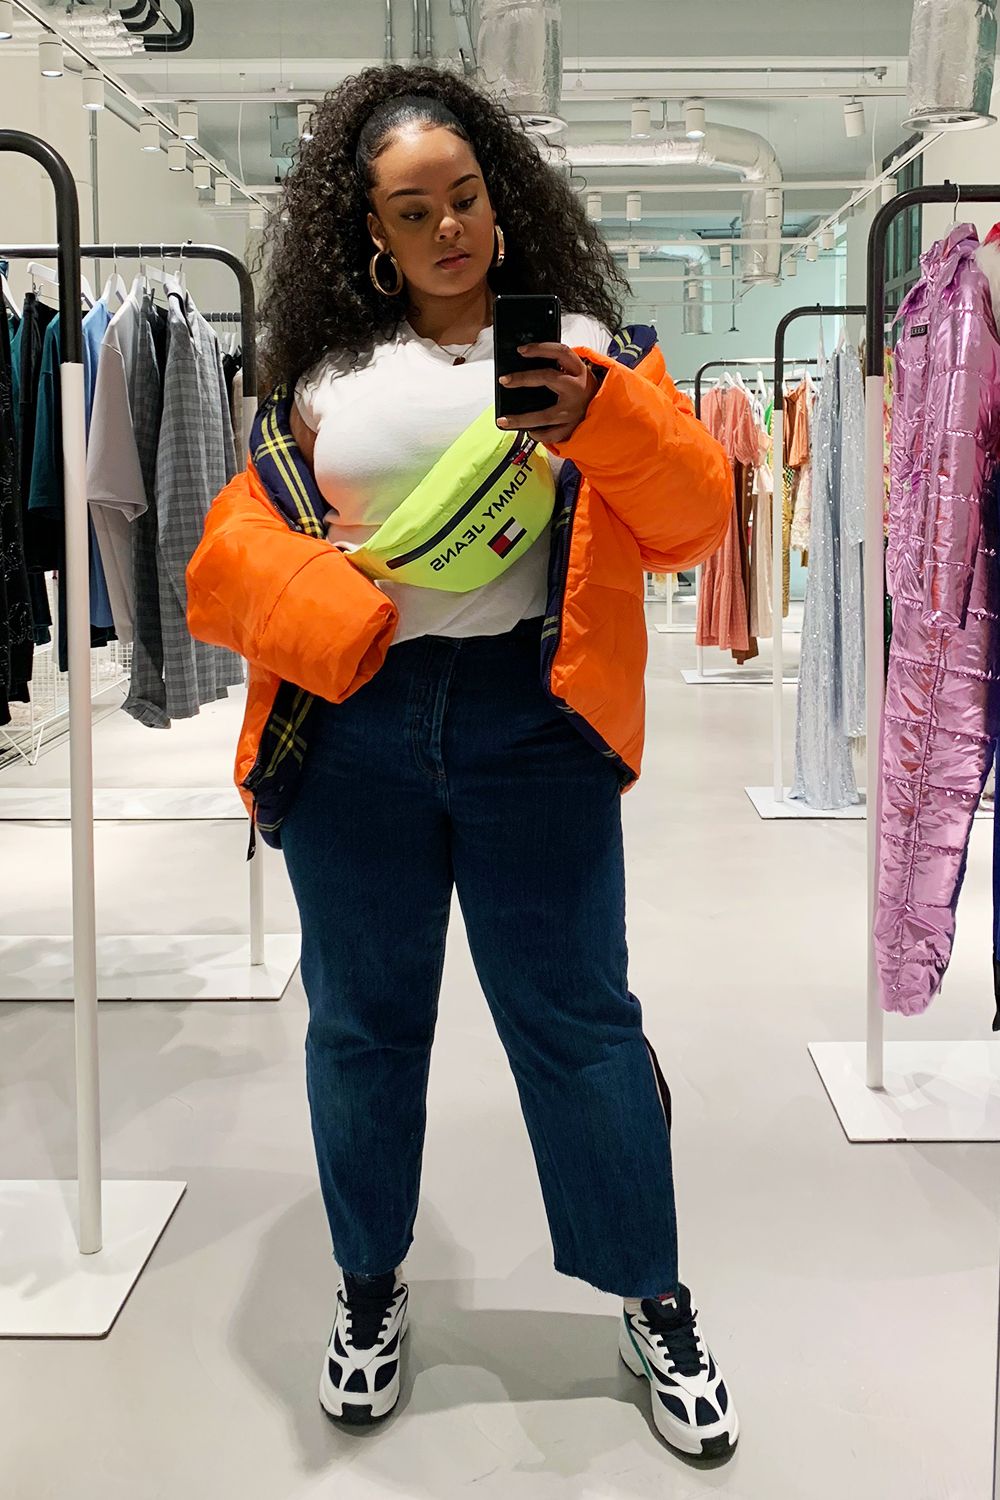 ASOS Fashion Trends 2019: We Tried on the Best Pieces | Who What Wear